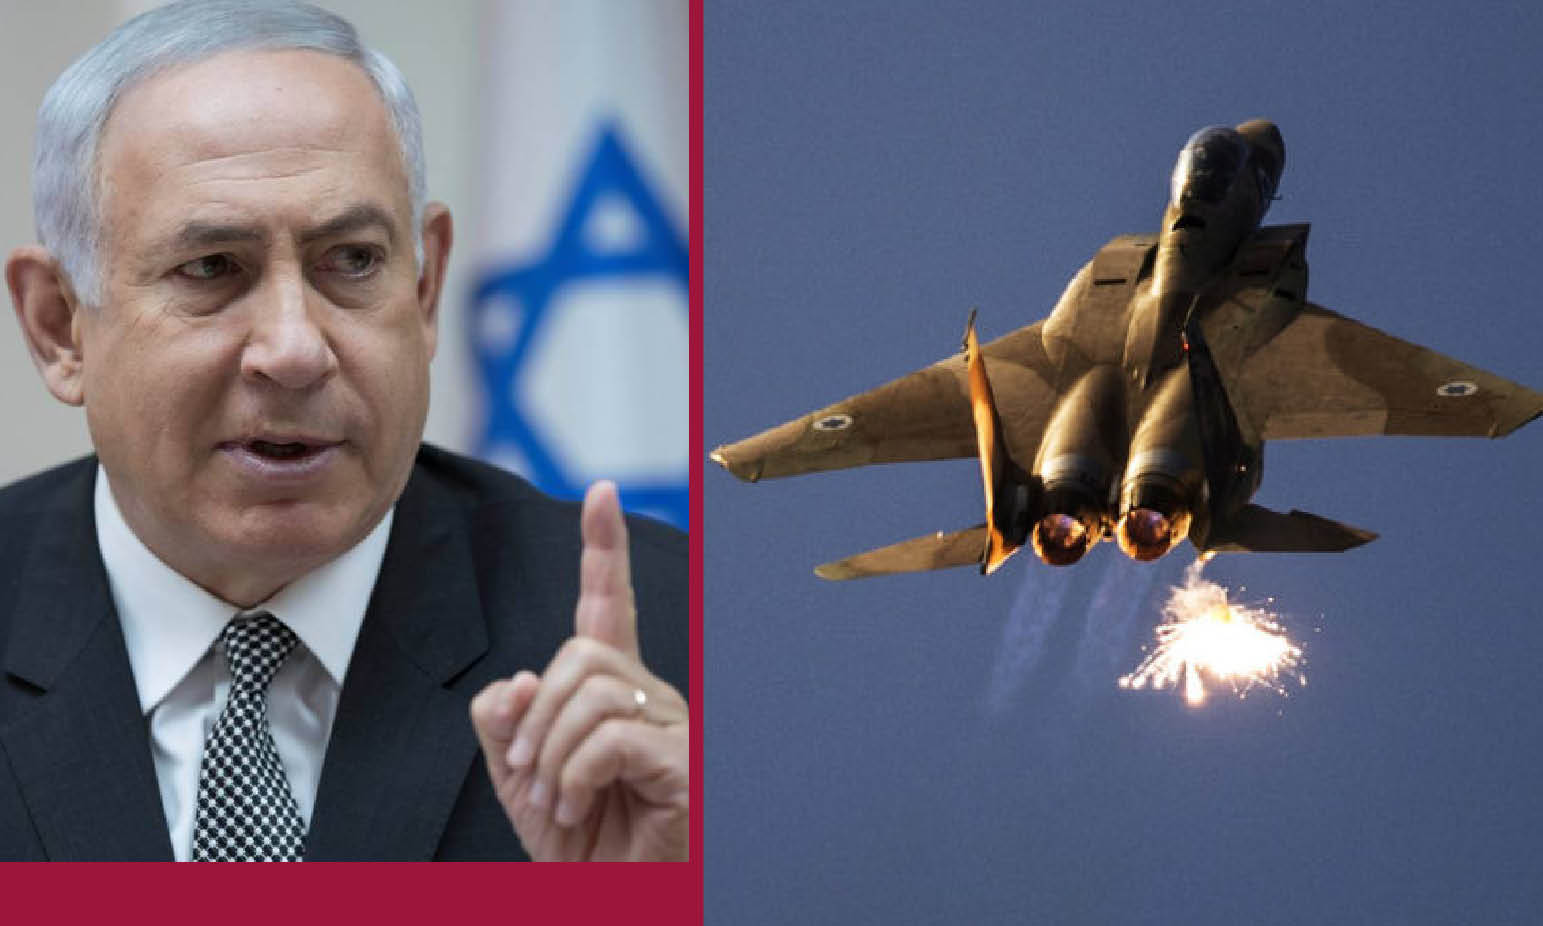 THE ZIONIST GANGSTER NETANYAHU ATTACKS SYRIA FOR TRIGGING HELL